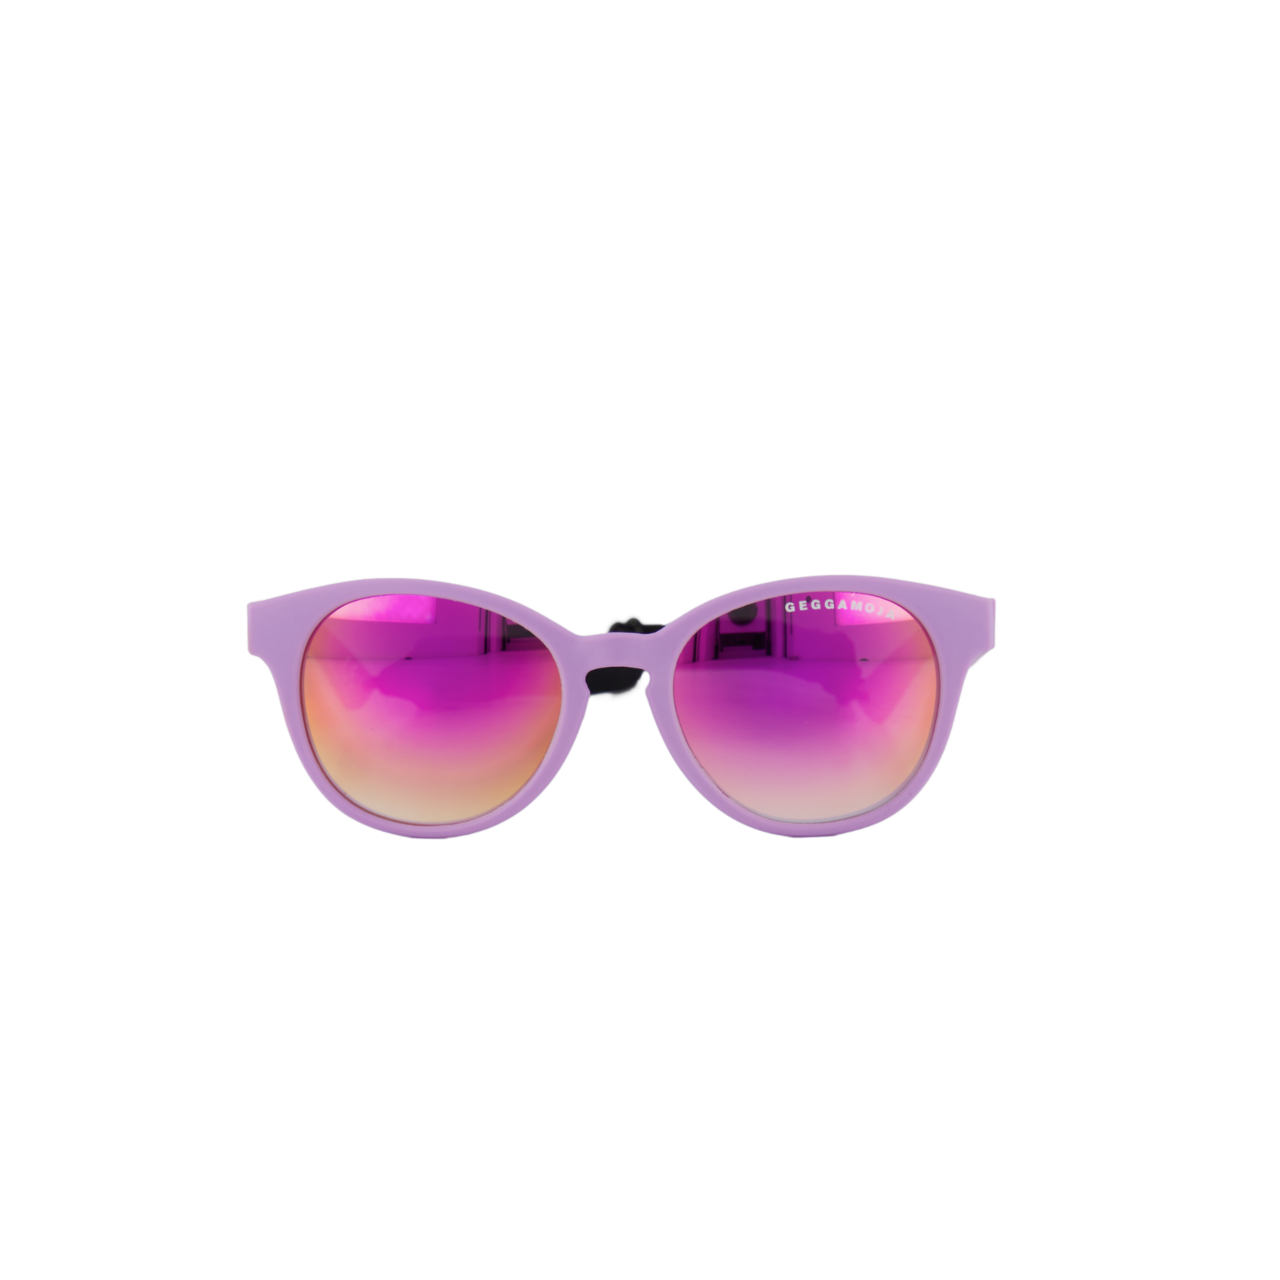 Sunglass 2-6 y Orchid bloom